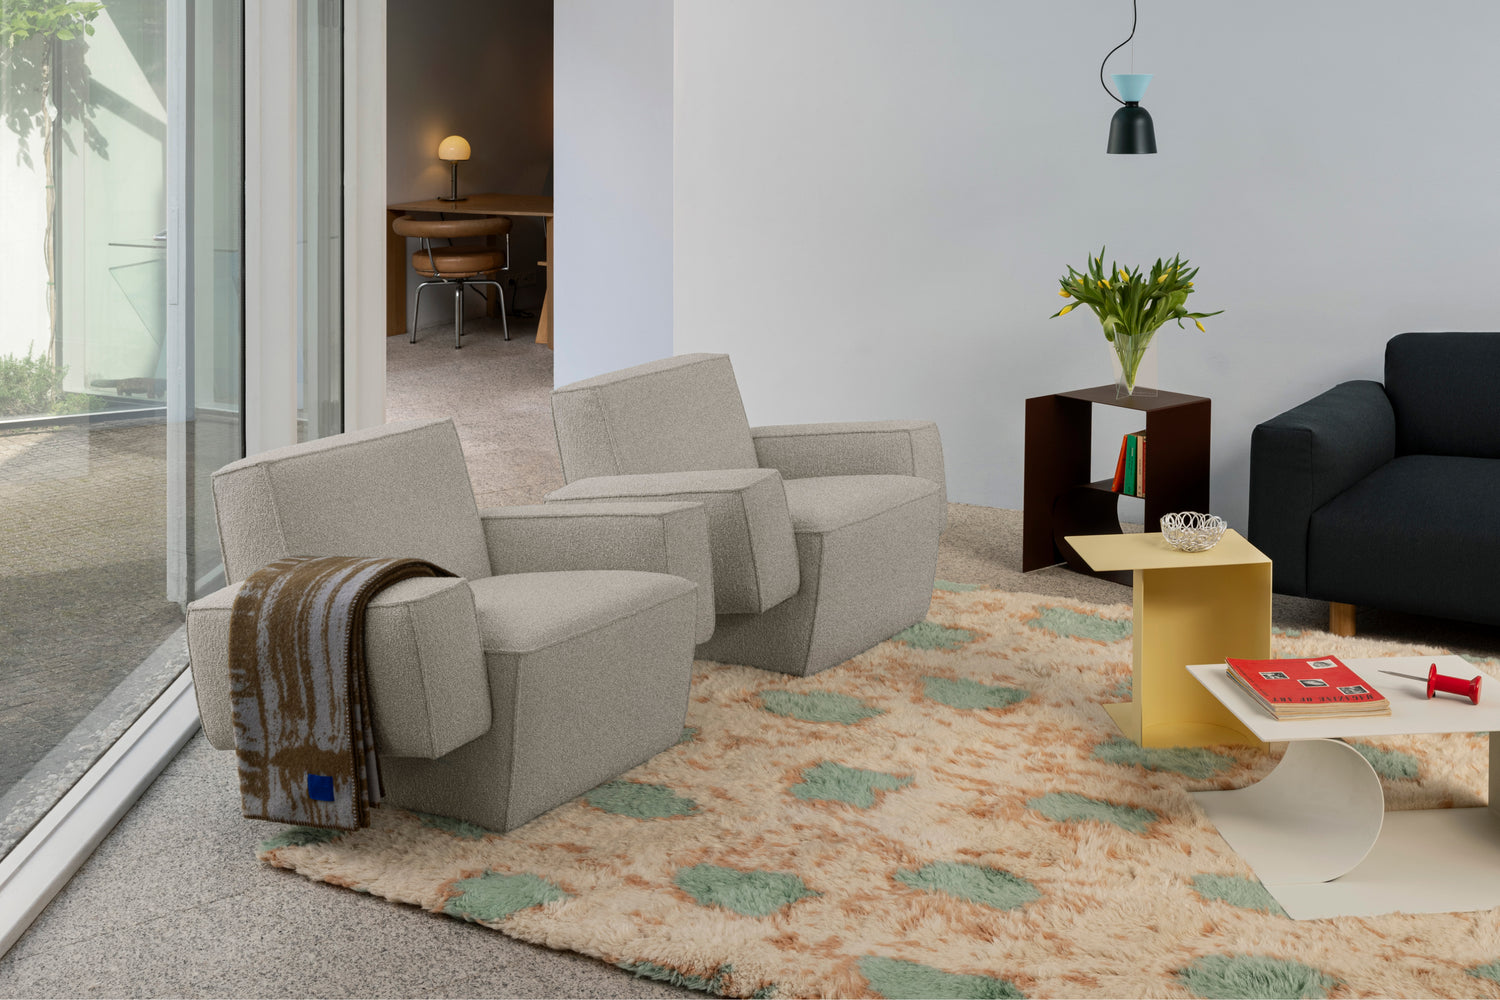 A lifestyle image of living room scene featuring Hunk Lounge Chair with Armrests, Glitch Throw, Monster Rug, Glyph Side Tables, and Alphabeta Pendant Light.